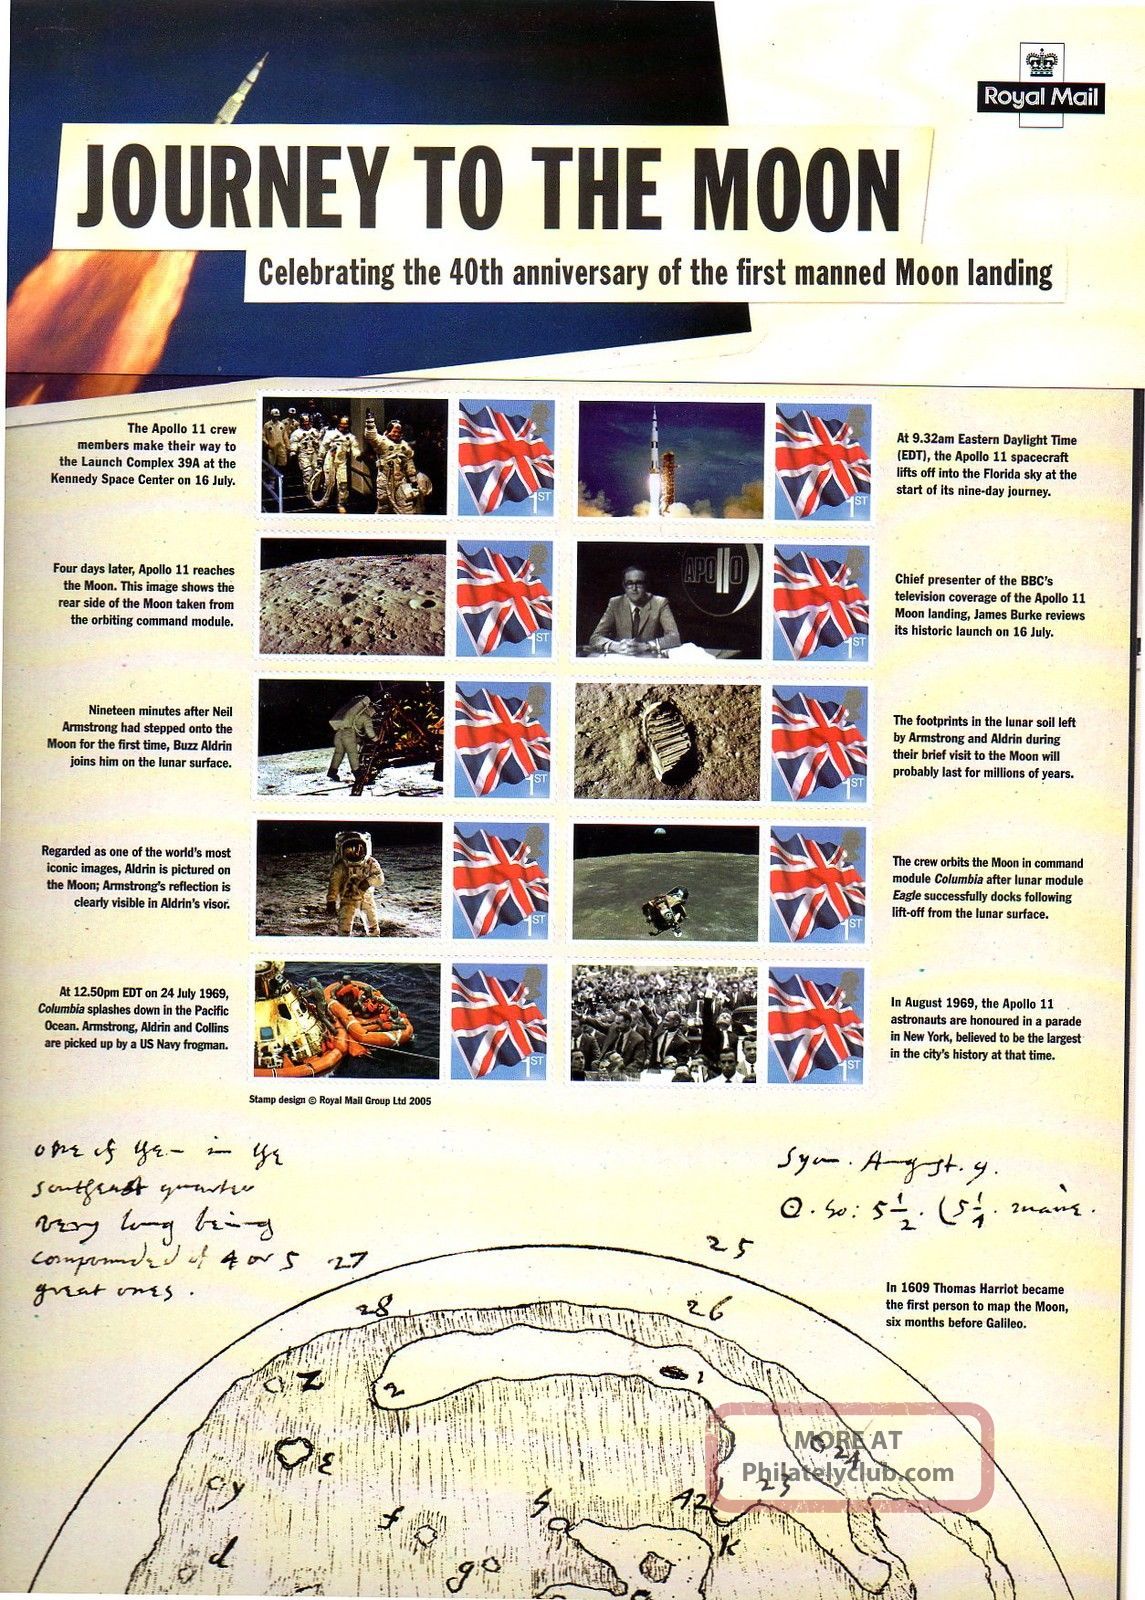 Cs4 2009 Journey To The Moon Royal Mail Commemorative Smilers Sheet Great Britain photo